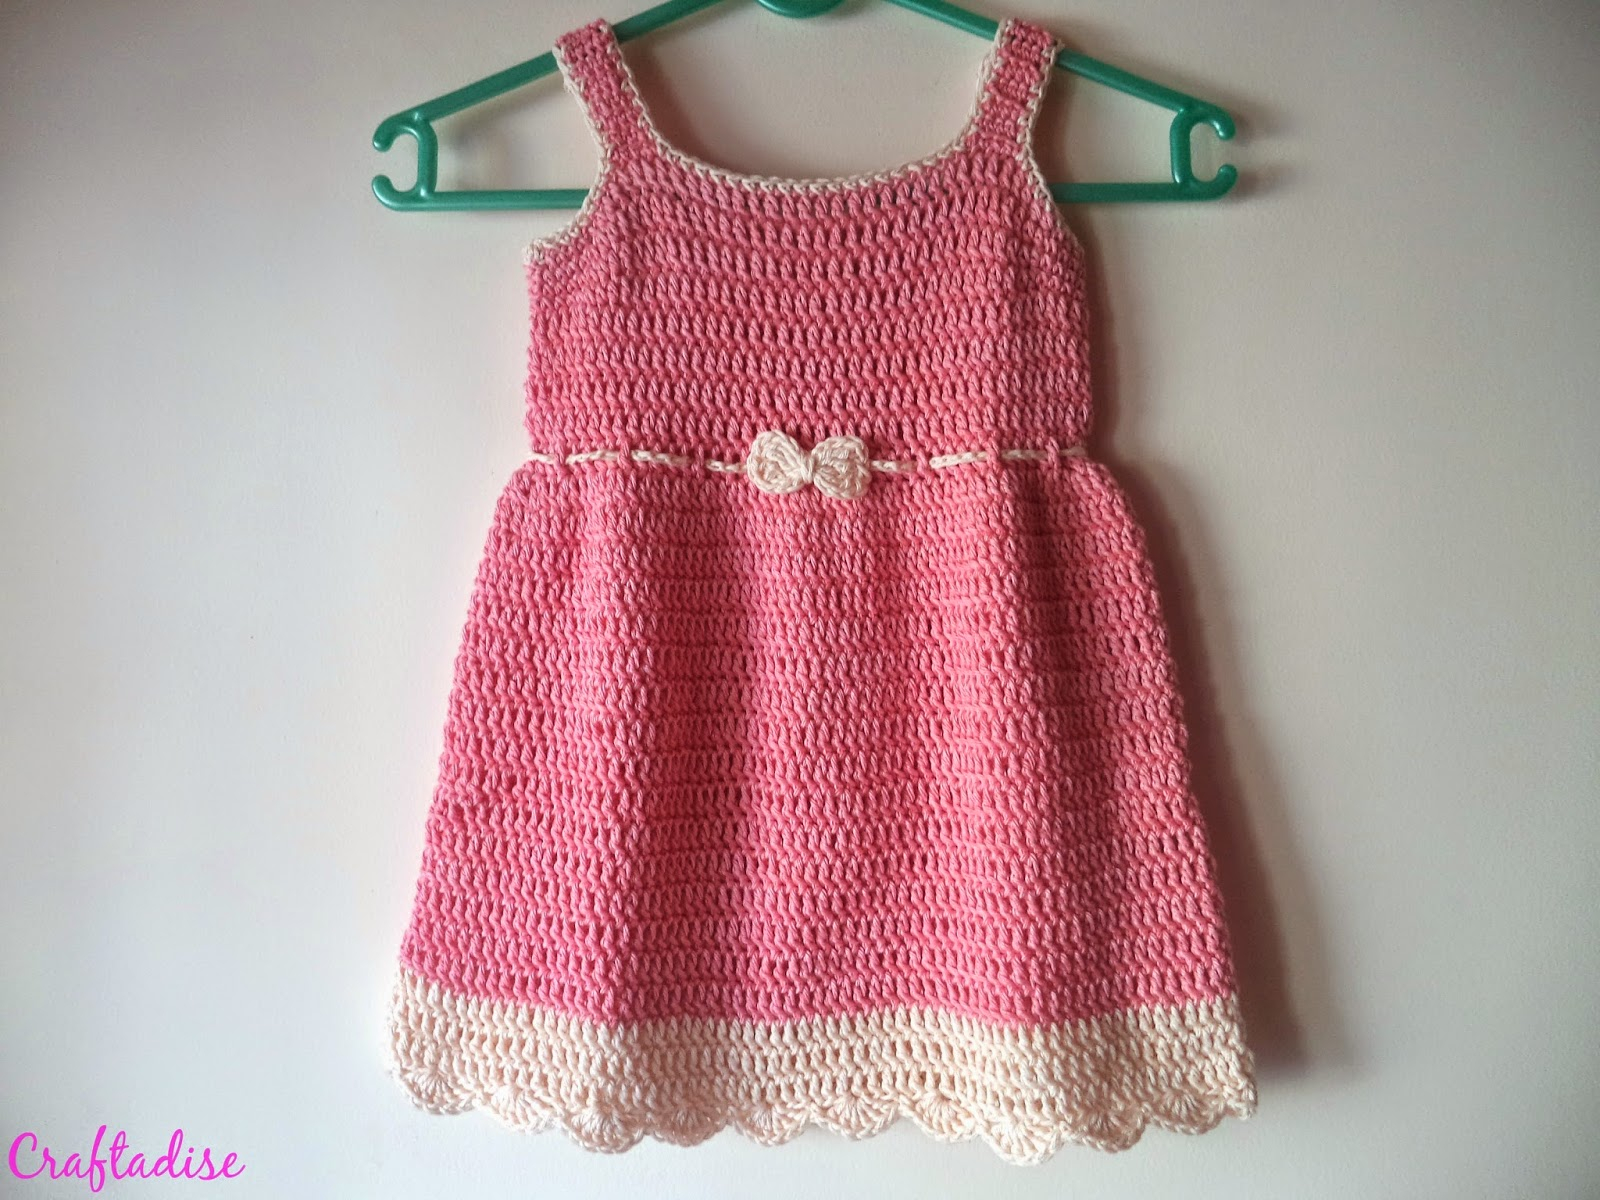 Crochet Toddler Dress Pattern Made In Craftadise Top Art Crafts Home Decor Blog In India